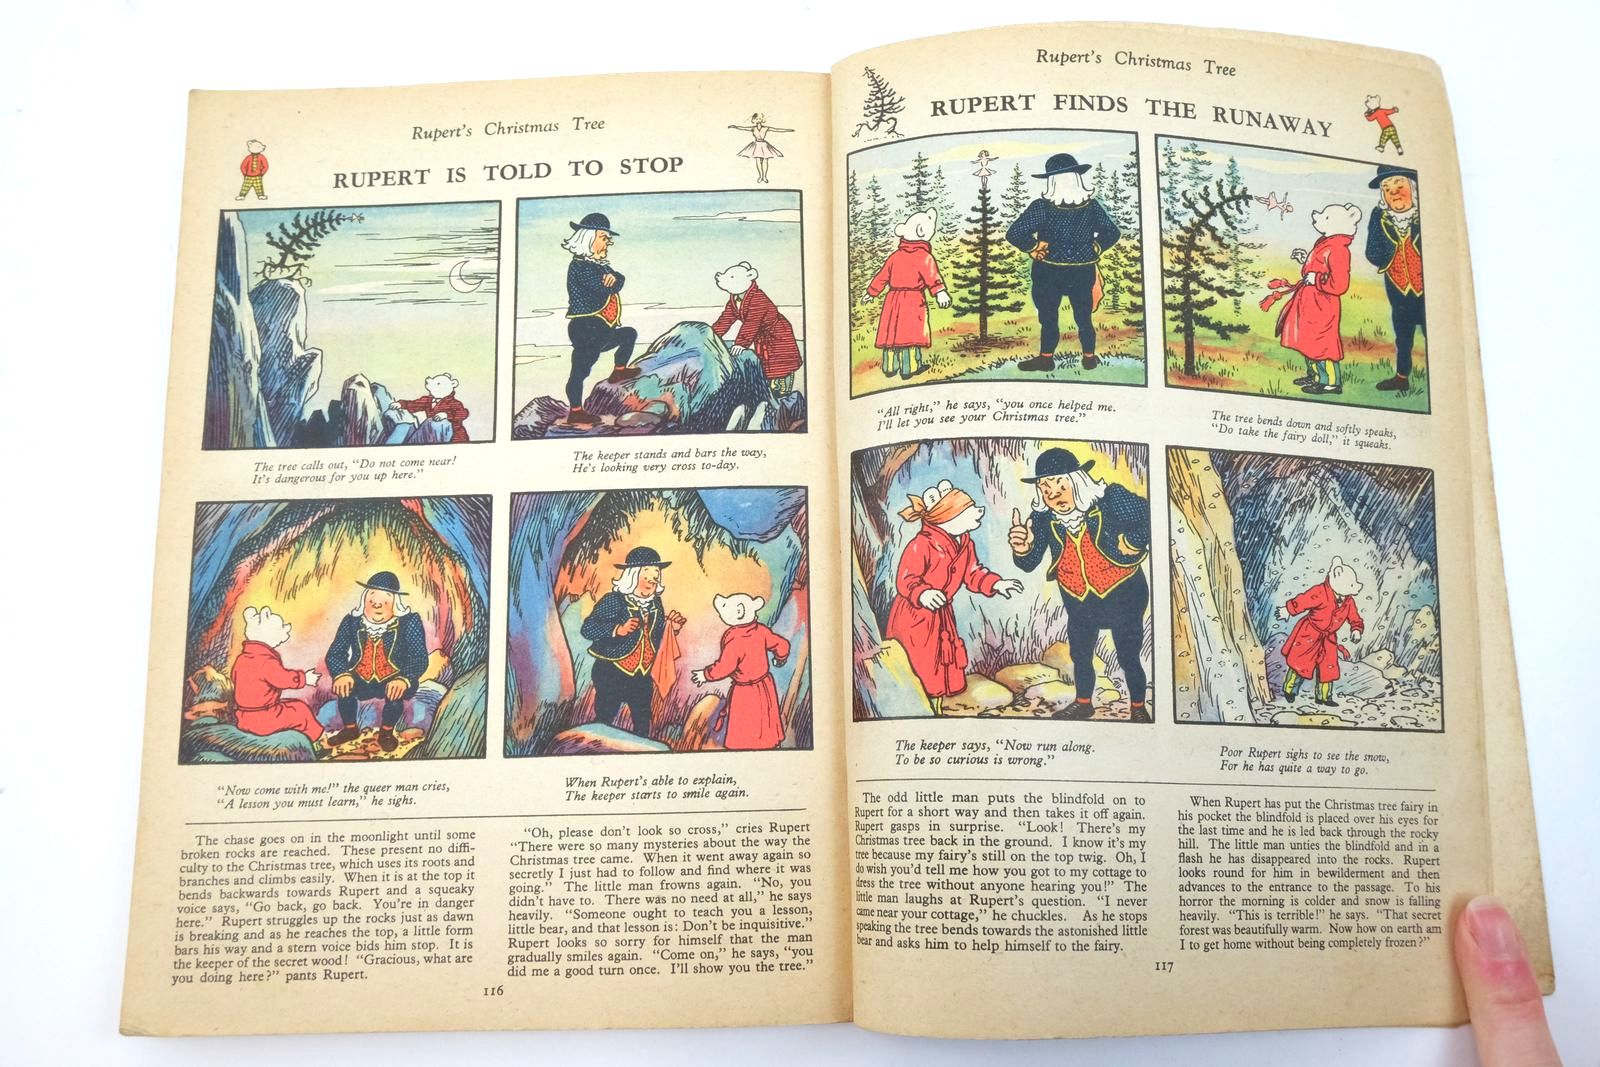 Photo of RUPERT ANNUAL 1947 - MORE ADVENTURES OF RUPERT written by Bestall, Alfred illustrated by Bestall, Alfred published by Daily Express (STOCK CODE: 2136723)  for sale by Stella & Rose's Books